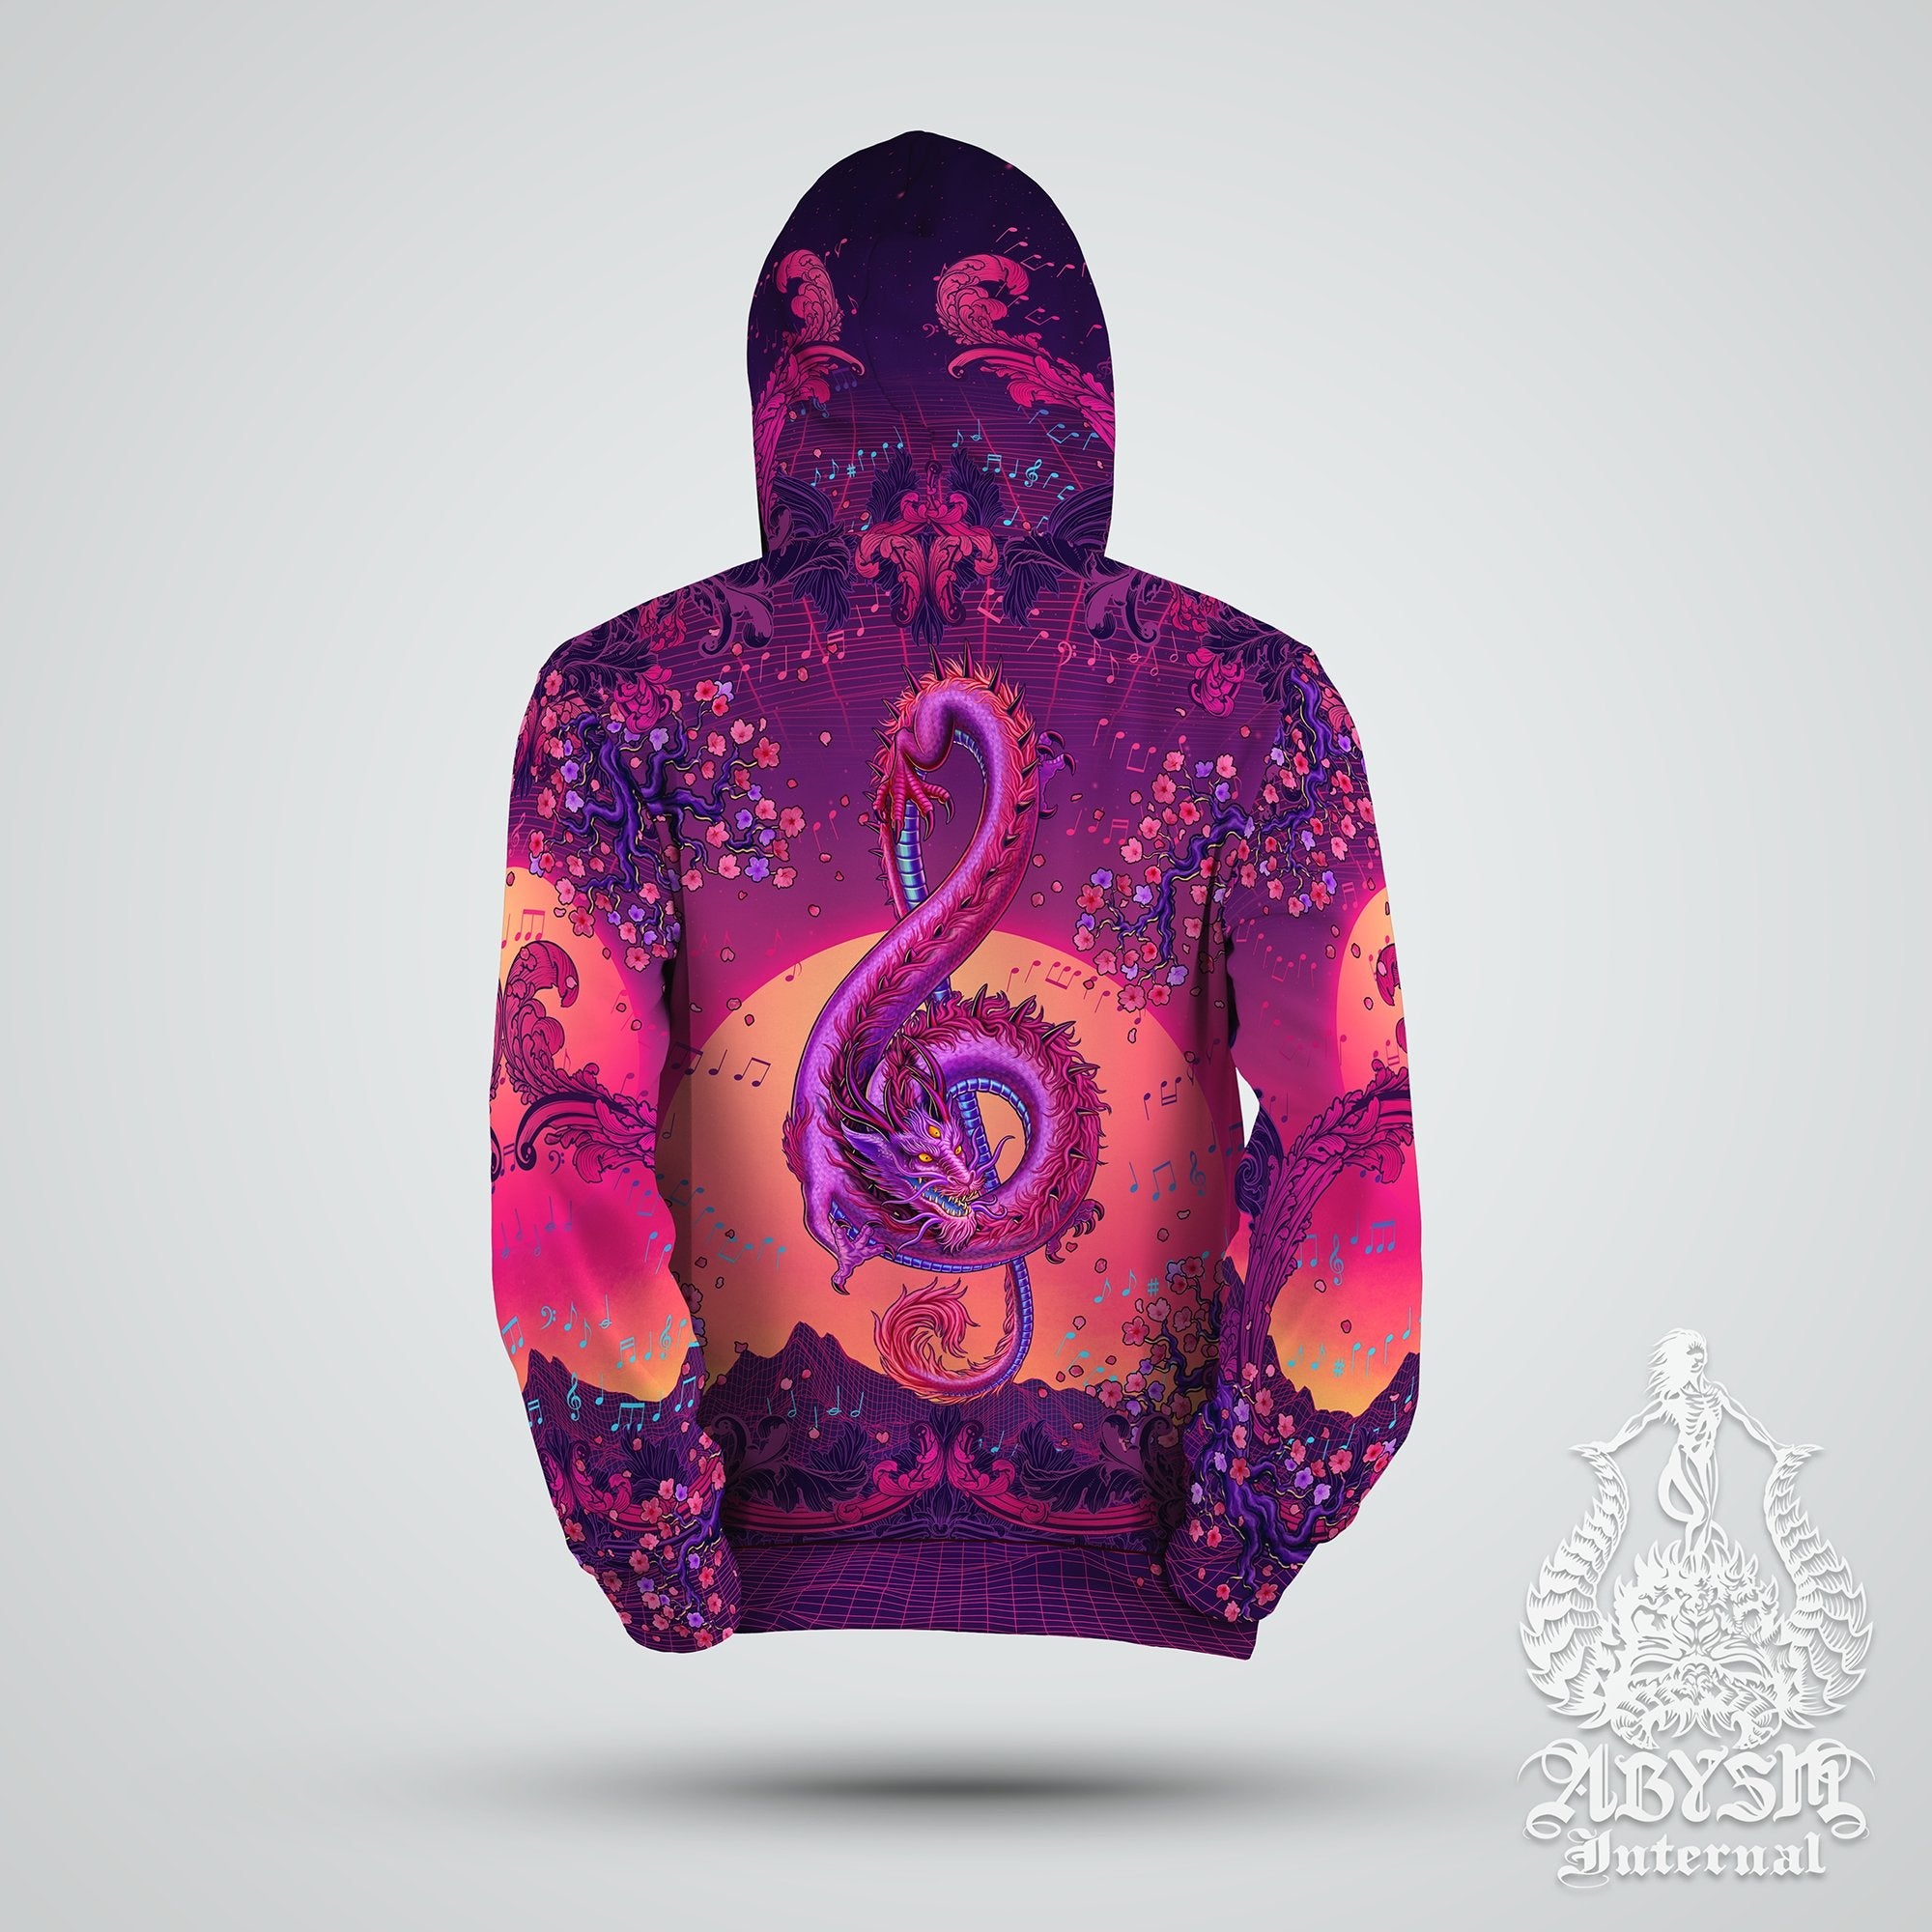 Synthwave Hoodie, Trippy Outfit, Vaporwave Dragon Streetwear, Psychedelic Music Festival, Gamer 80s Alternative Clothing, Unisex - Retrowave - Abysm Internal